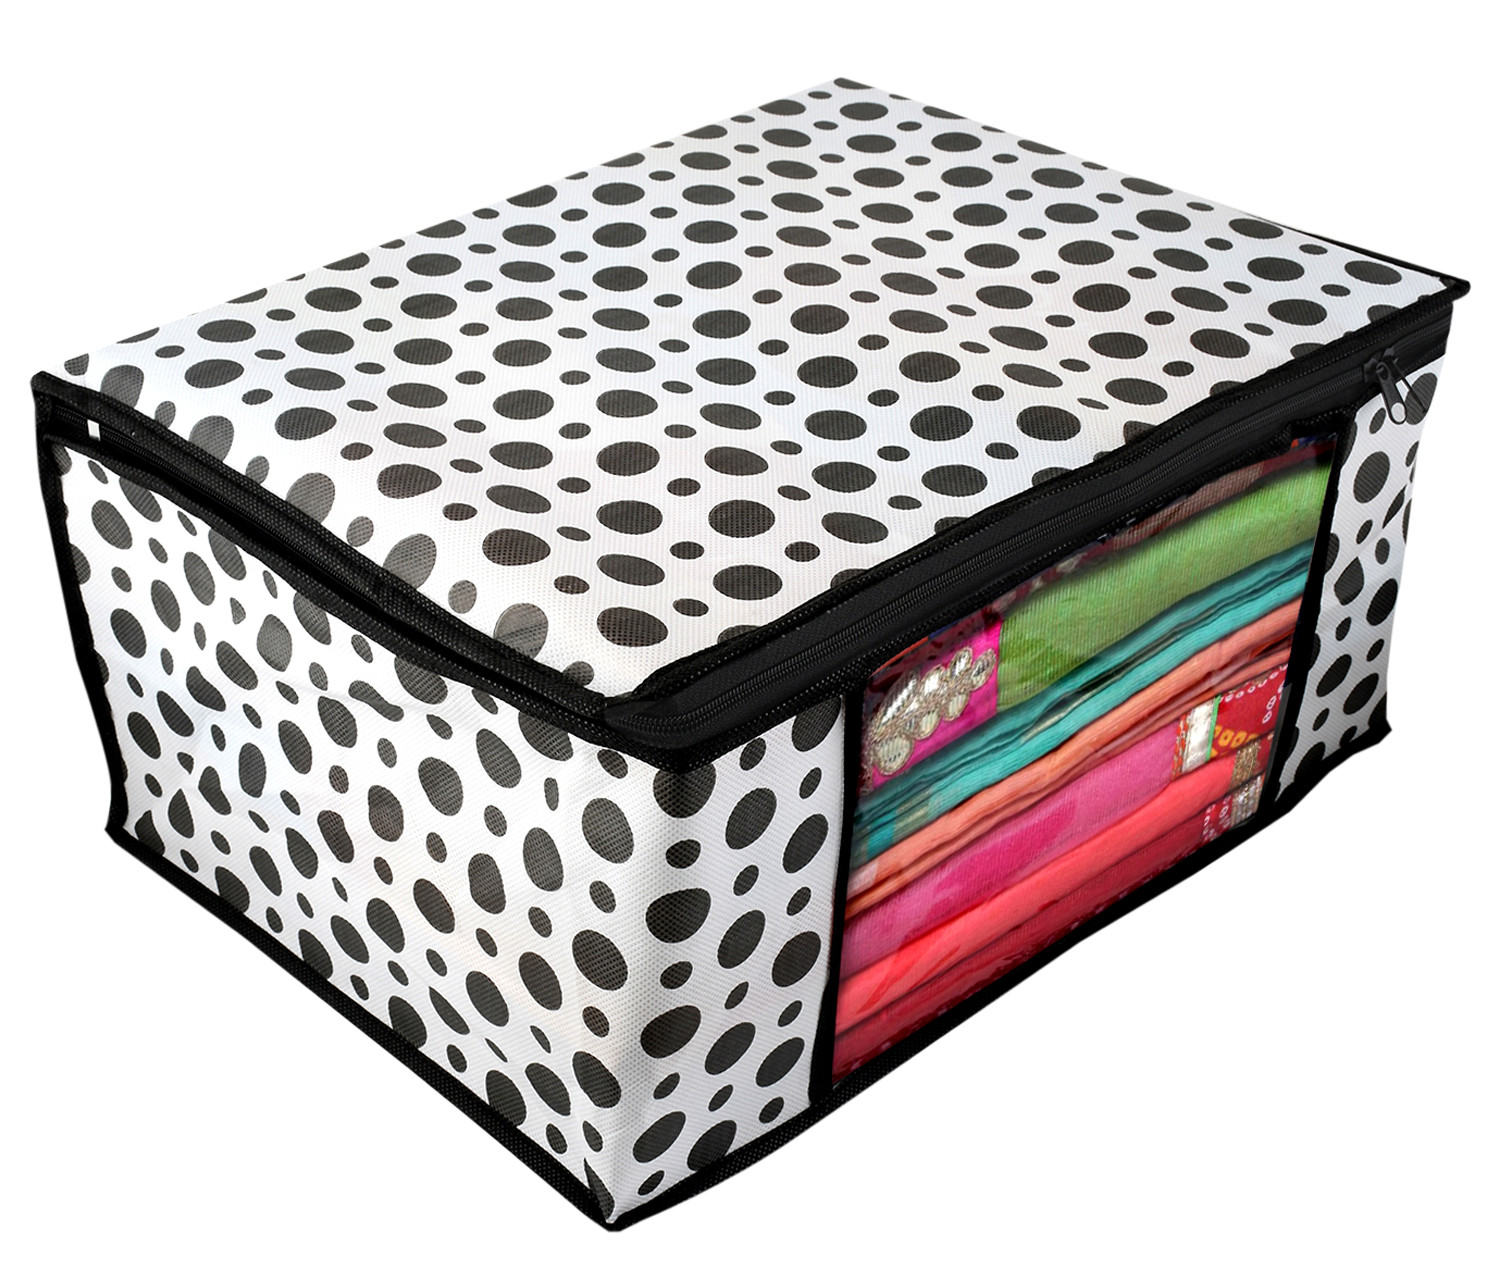 Kuber Industries Polka Dots Design Non Woven Fabric Saree Cover/ Clothes Organiser For Wardrobe Set with Transparent Window, Extra Large,(Black & White) -CTKTC38093